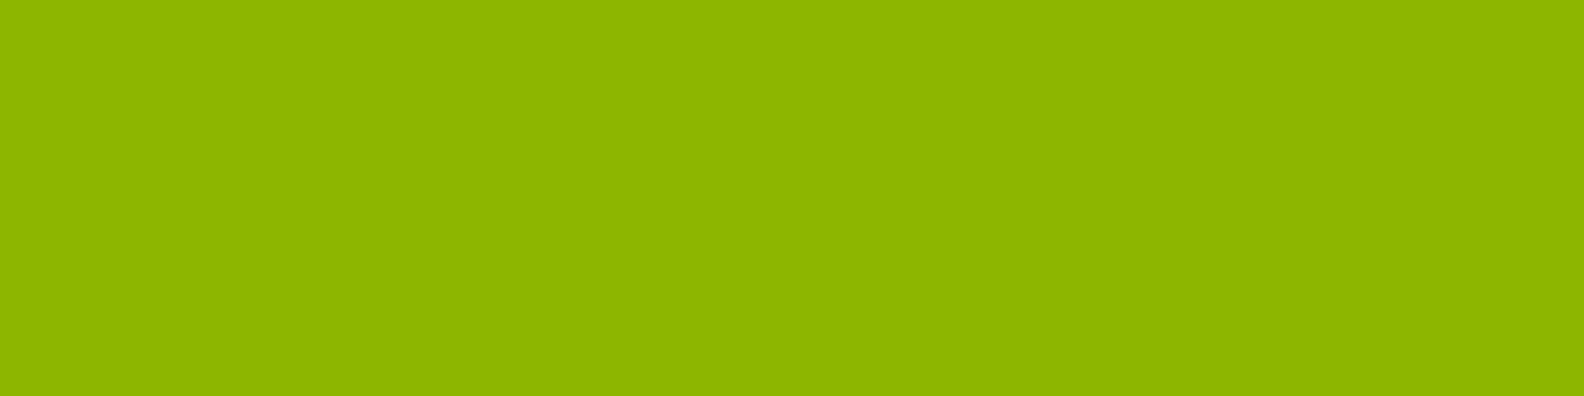 1584x396 Apple Green Solid Color Background